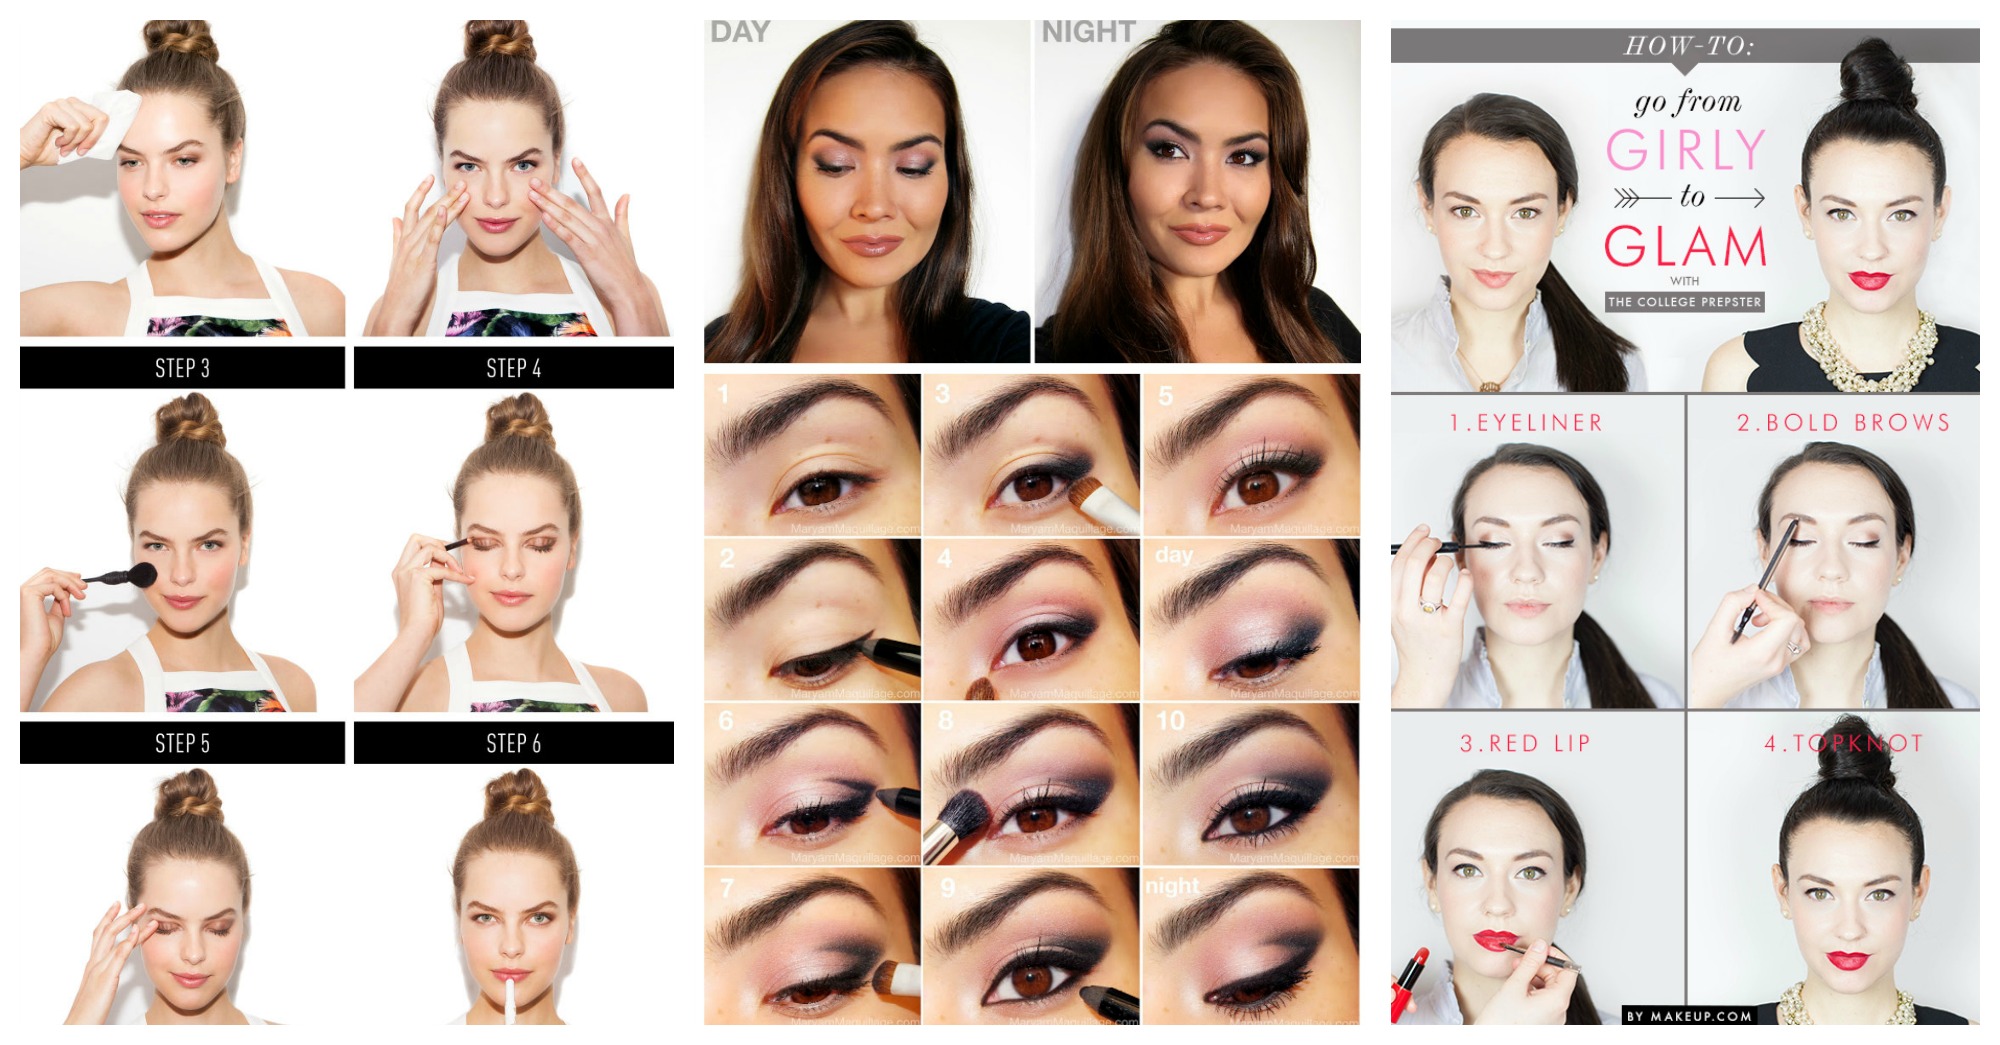 Great Day To Night Makeup Tutorials You Should Not Miss - fashionsy.com